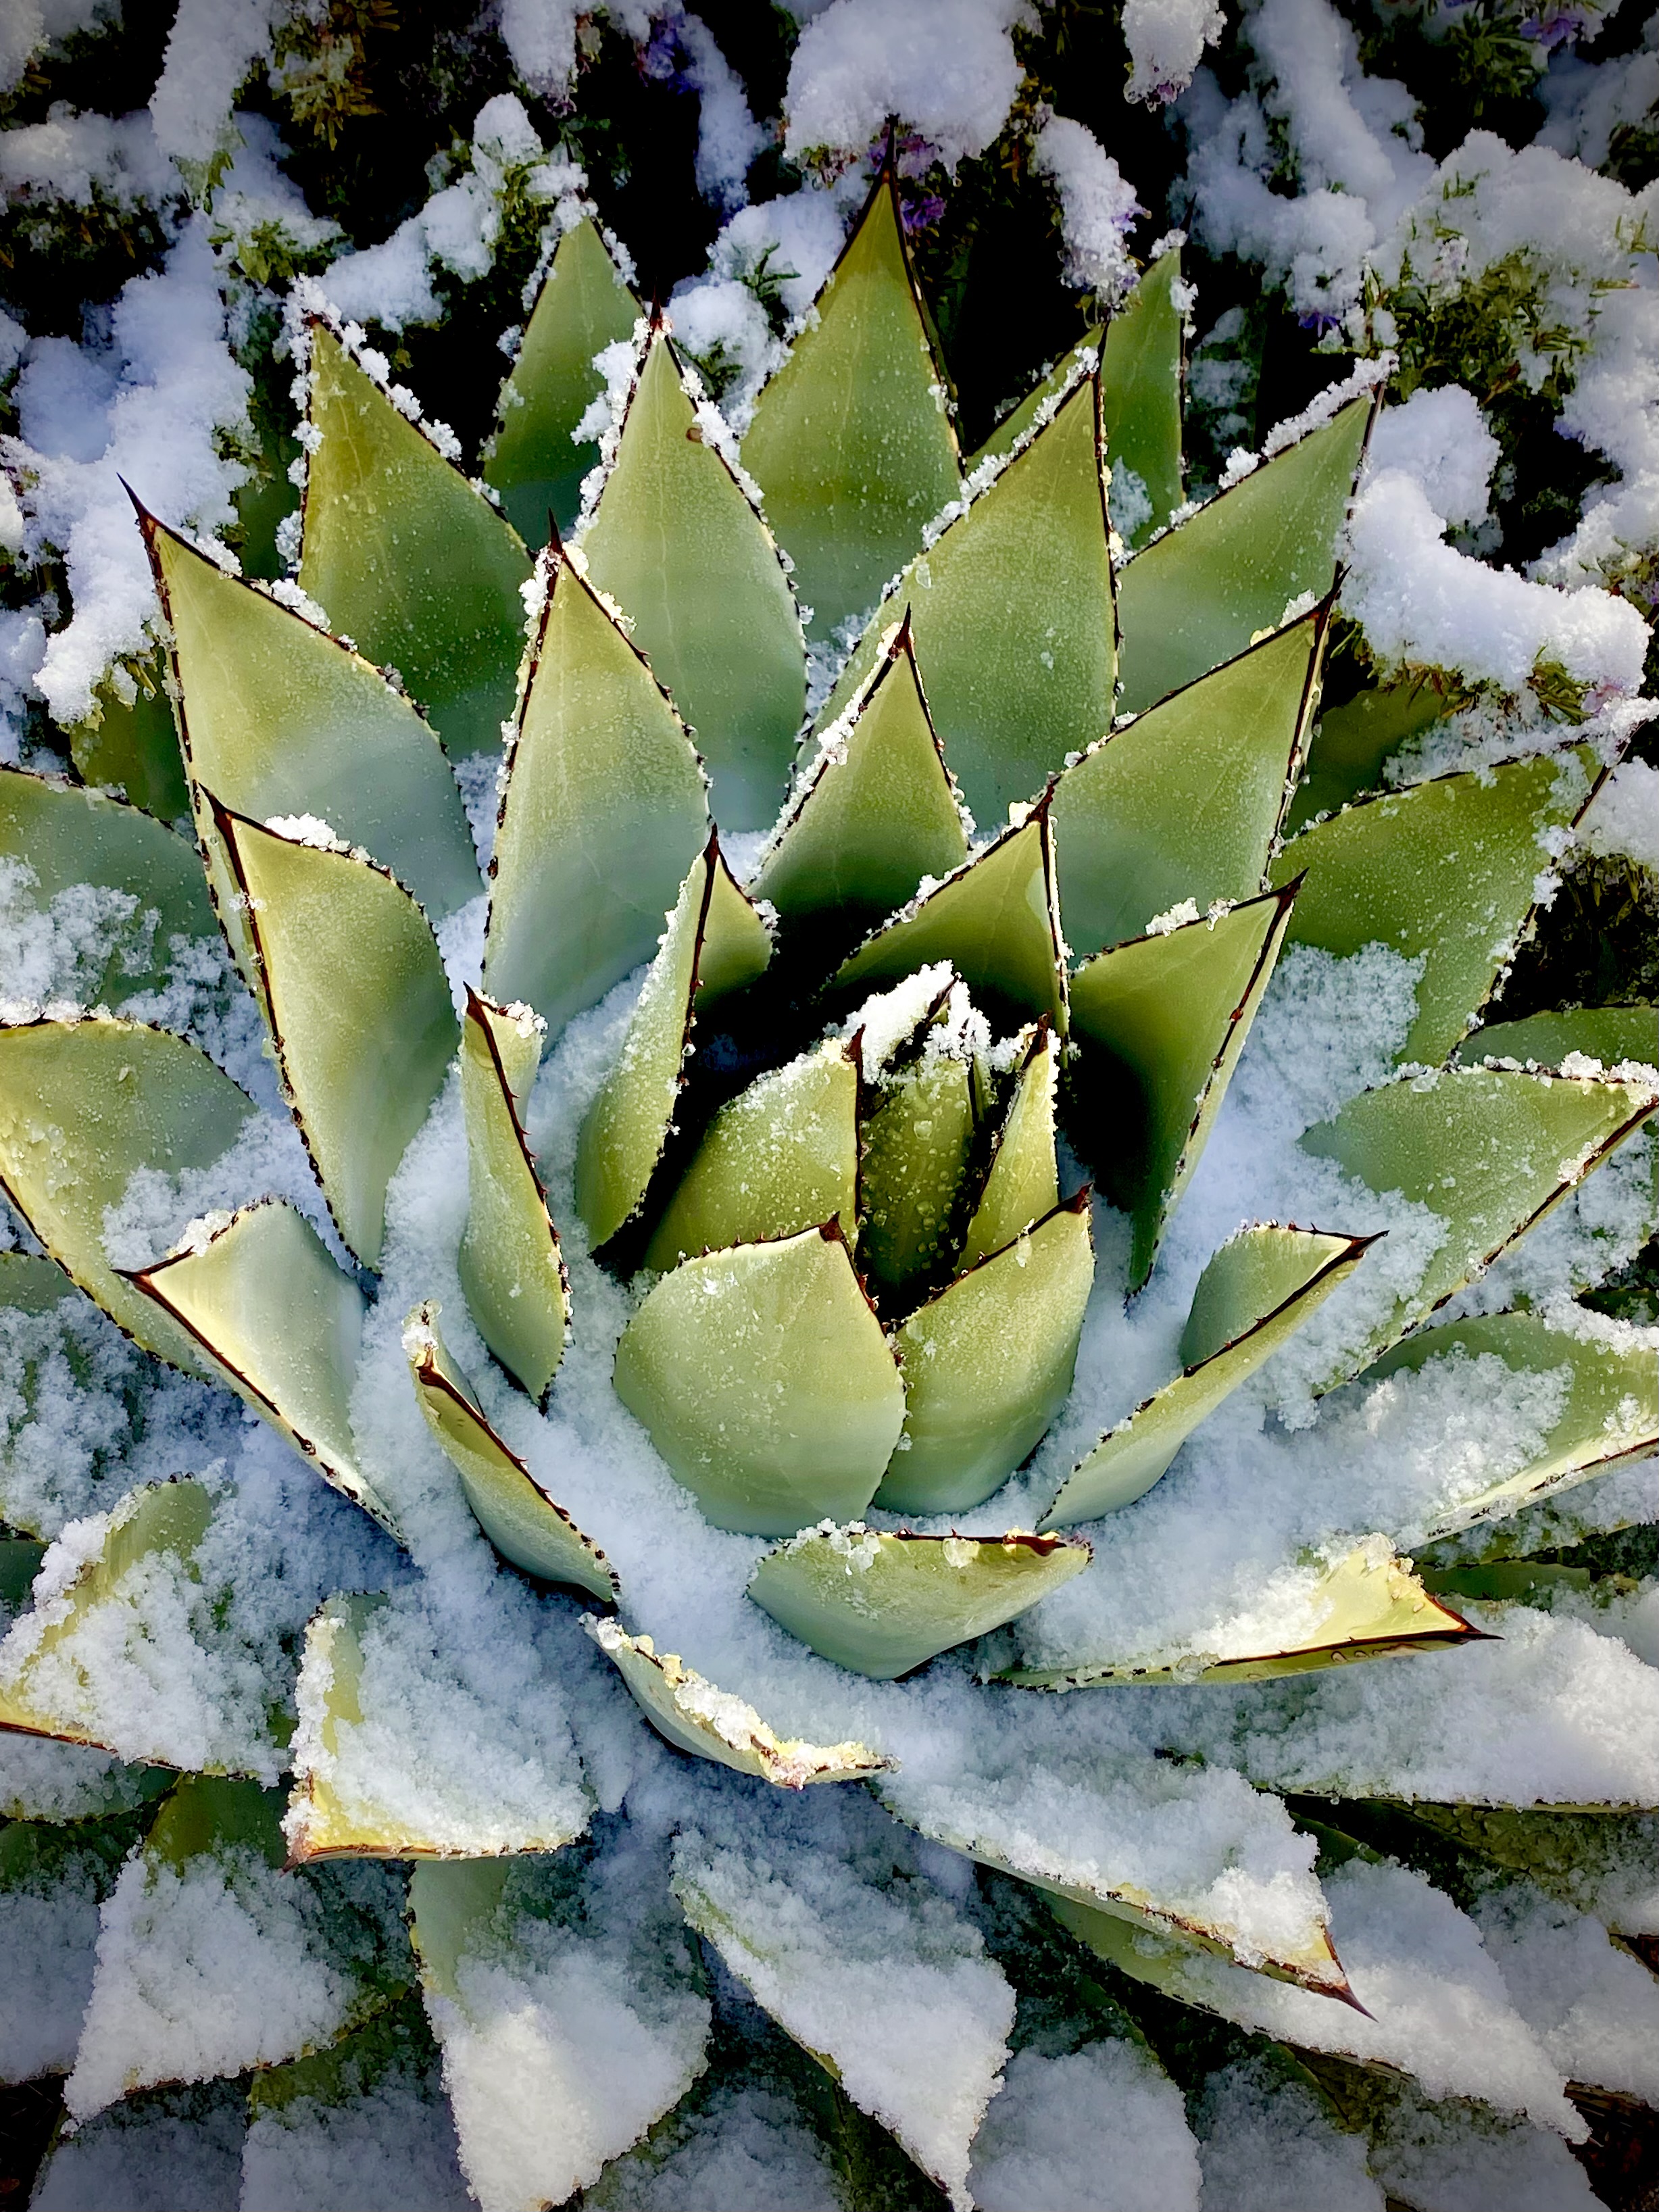 Photo by Lisa Renee Ludlum  |  The beautiful Agave blanketed in a fresh icy snow 